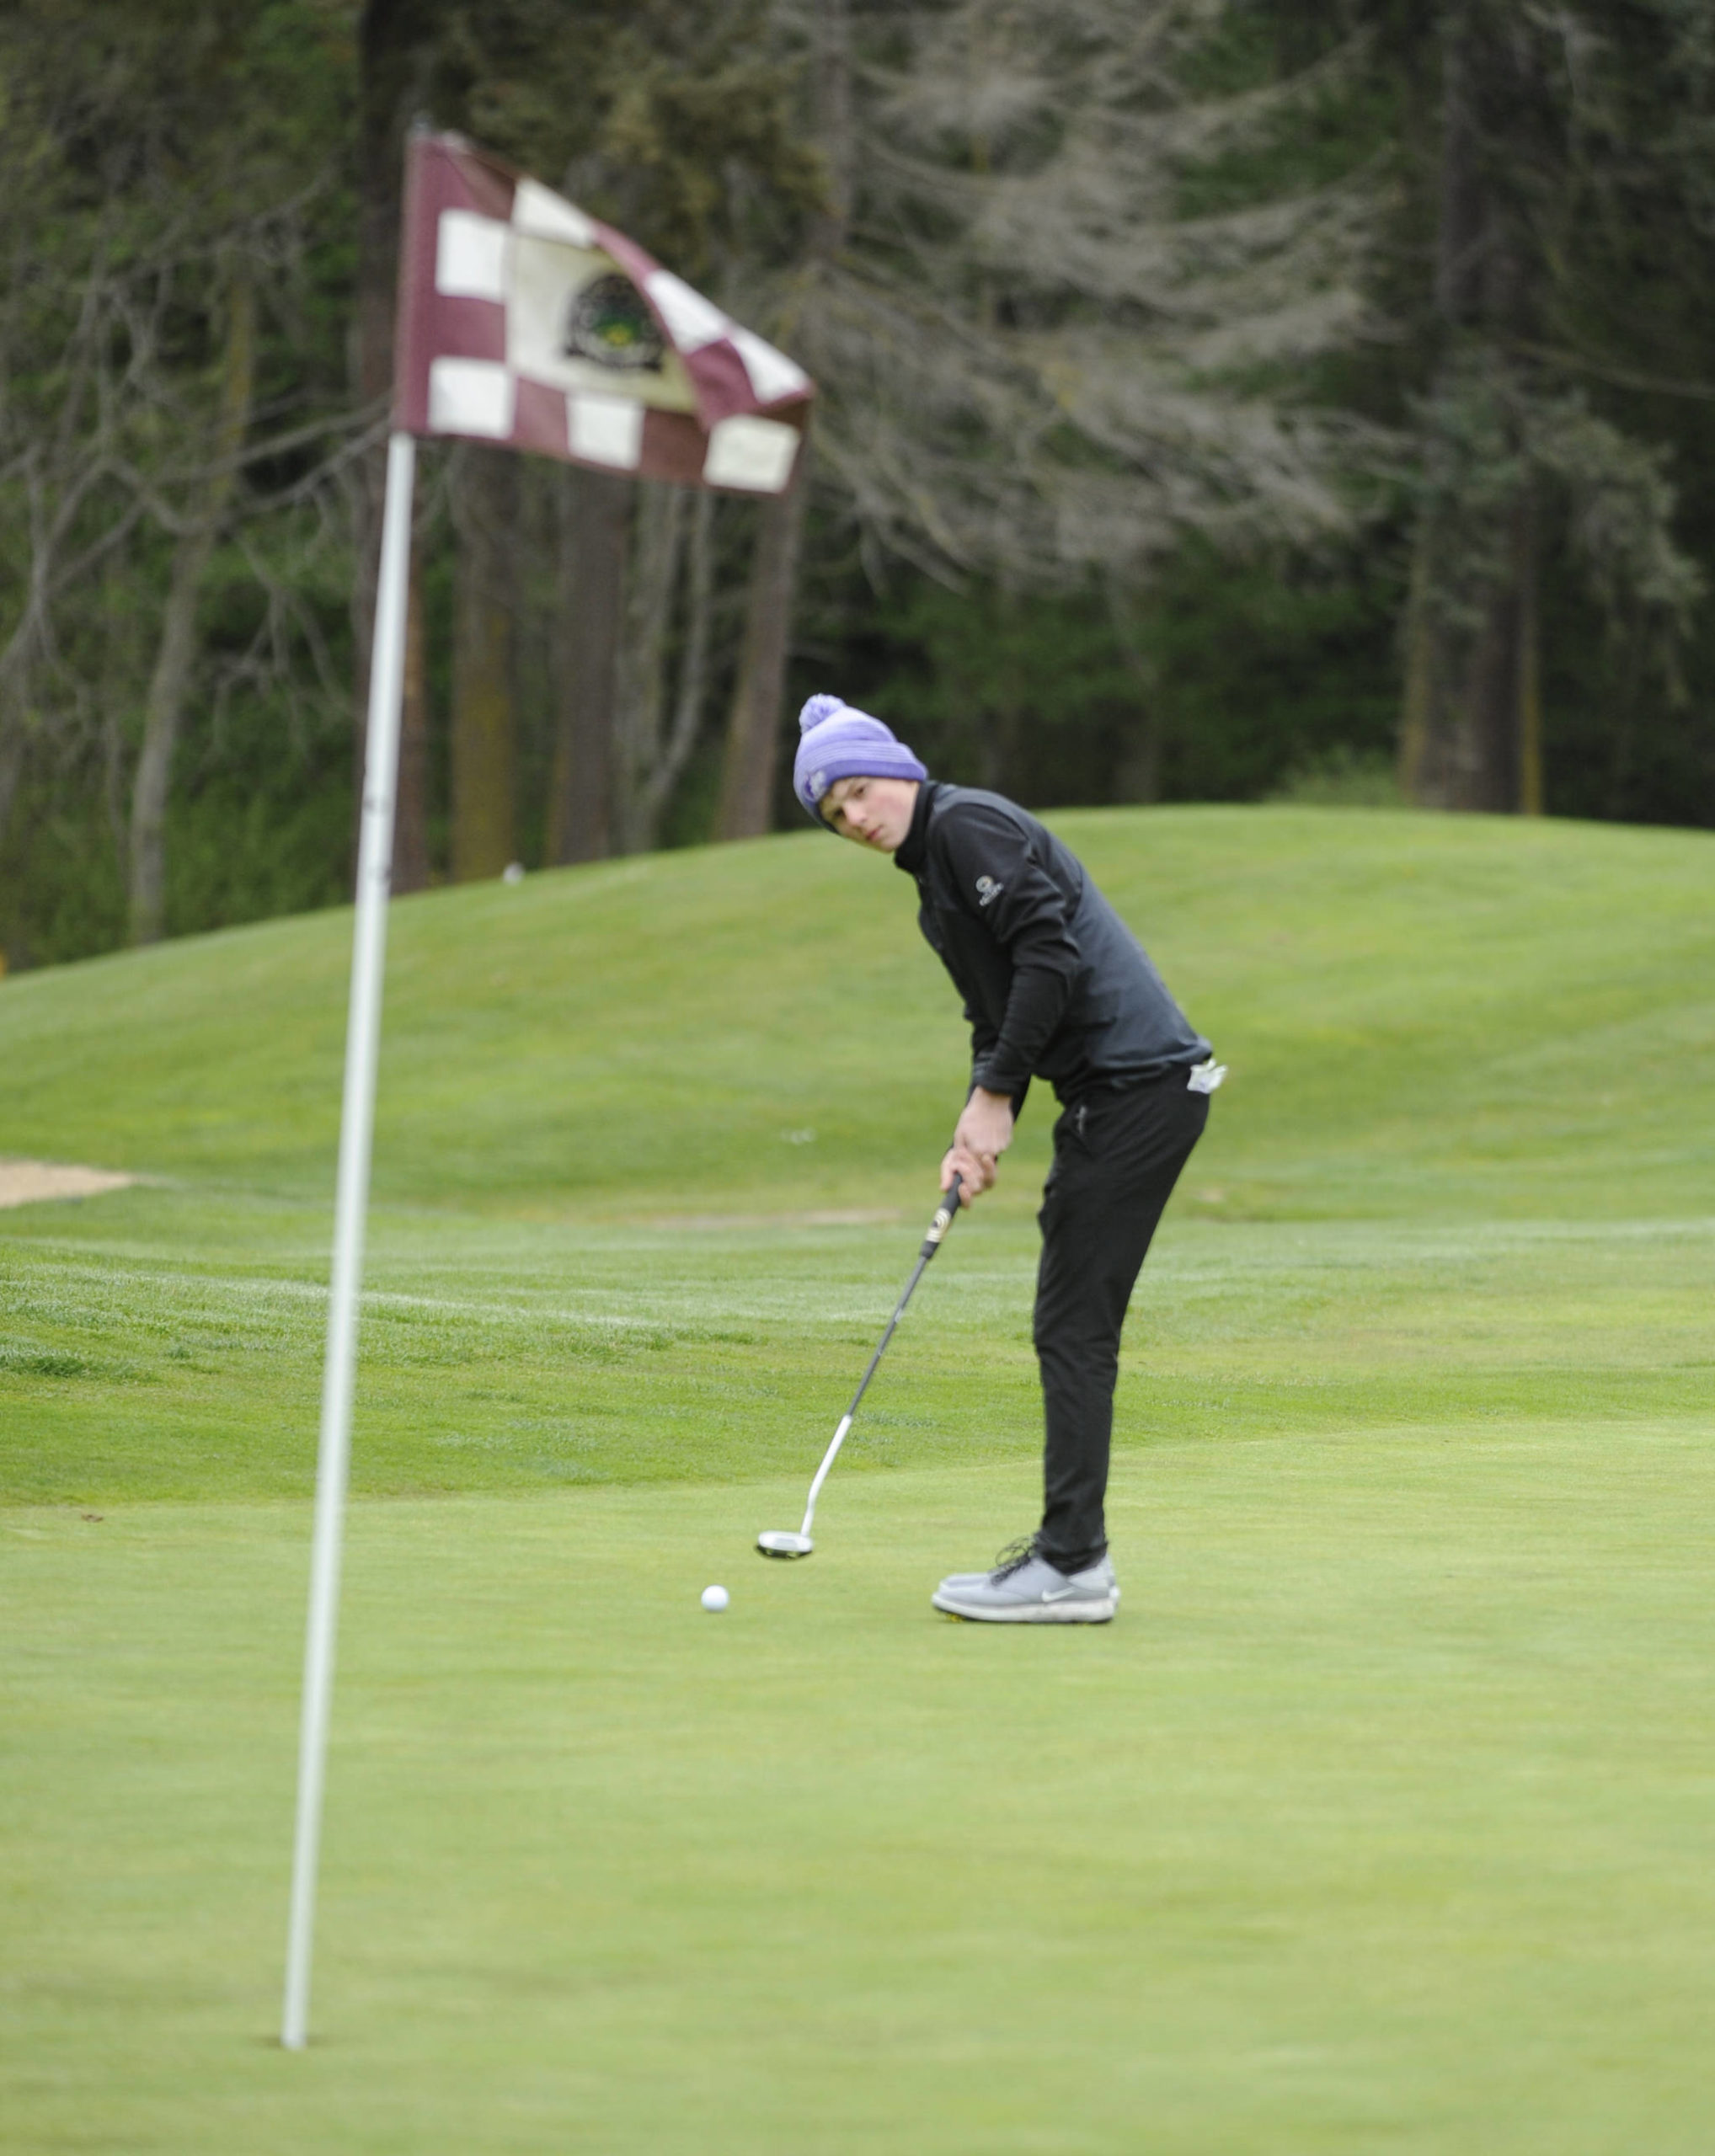 Sequim’s Ben Sweet looks to sink a putt on the first hole at The Cedars at Dungeness in 2019. The returning sophomore earned a top-20 finish at the state 2A tourney as a freshman. Sequim Gazette file photo by Michael Dashiell